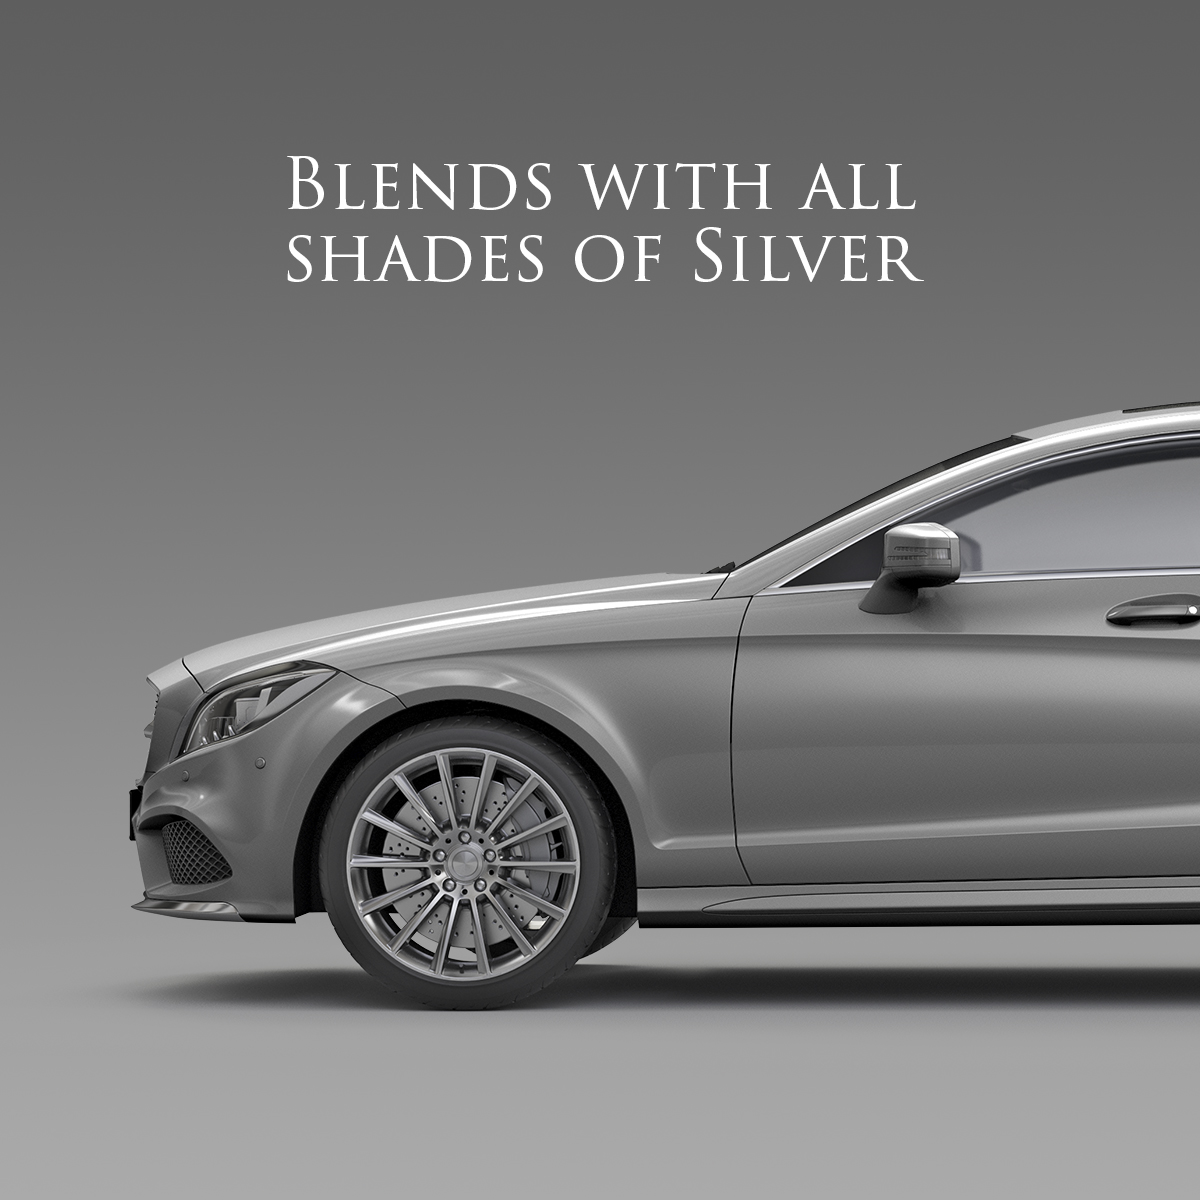 Blends with all shades of silver